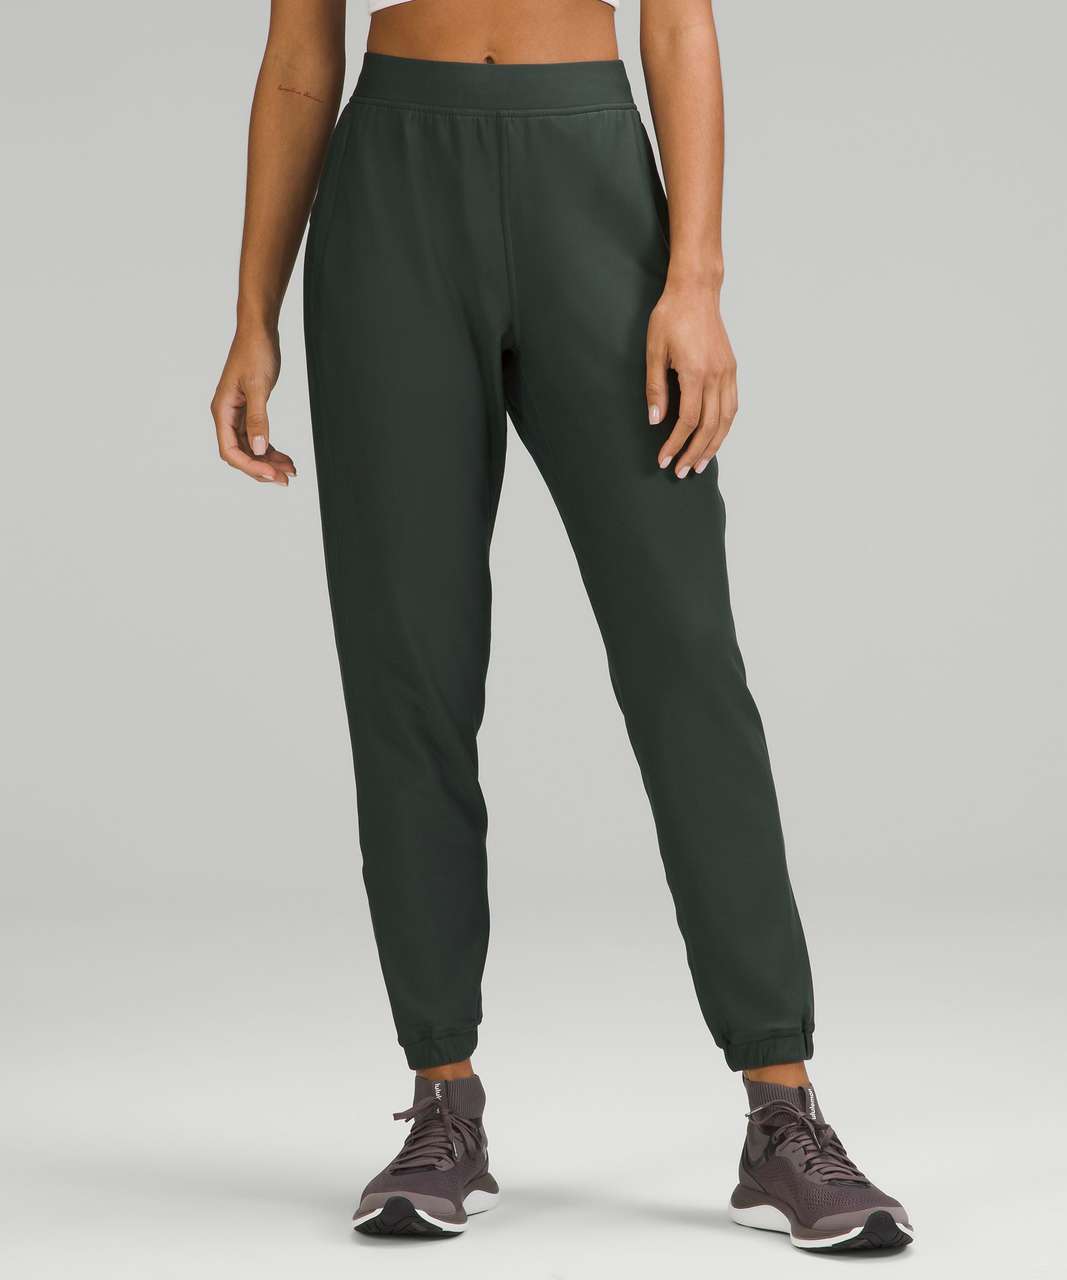 Lululemon Adapted State High-Rise Fleece Jogger - Smoked Spruce